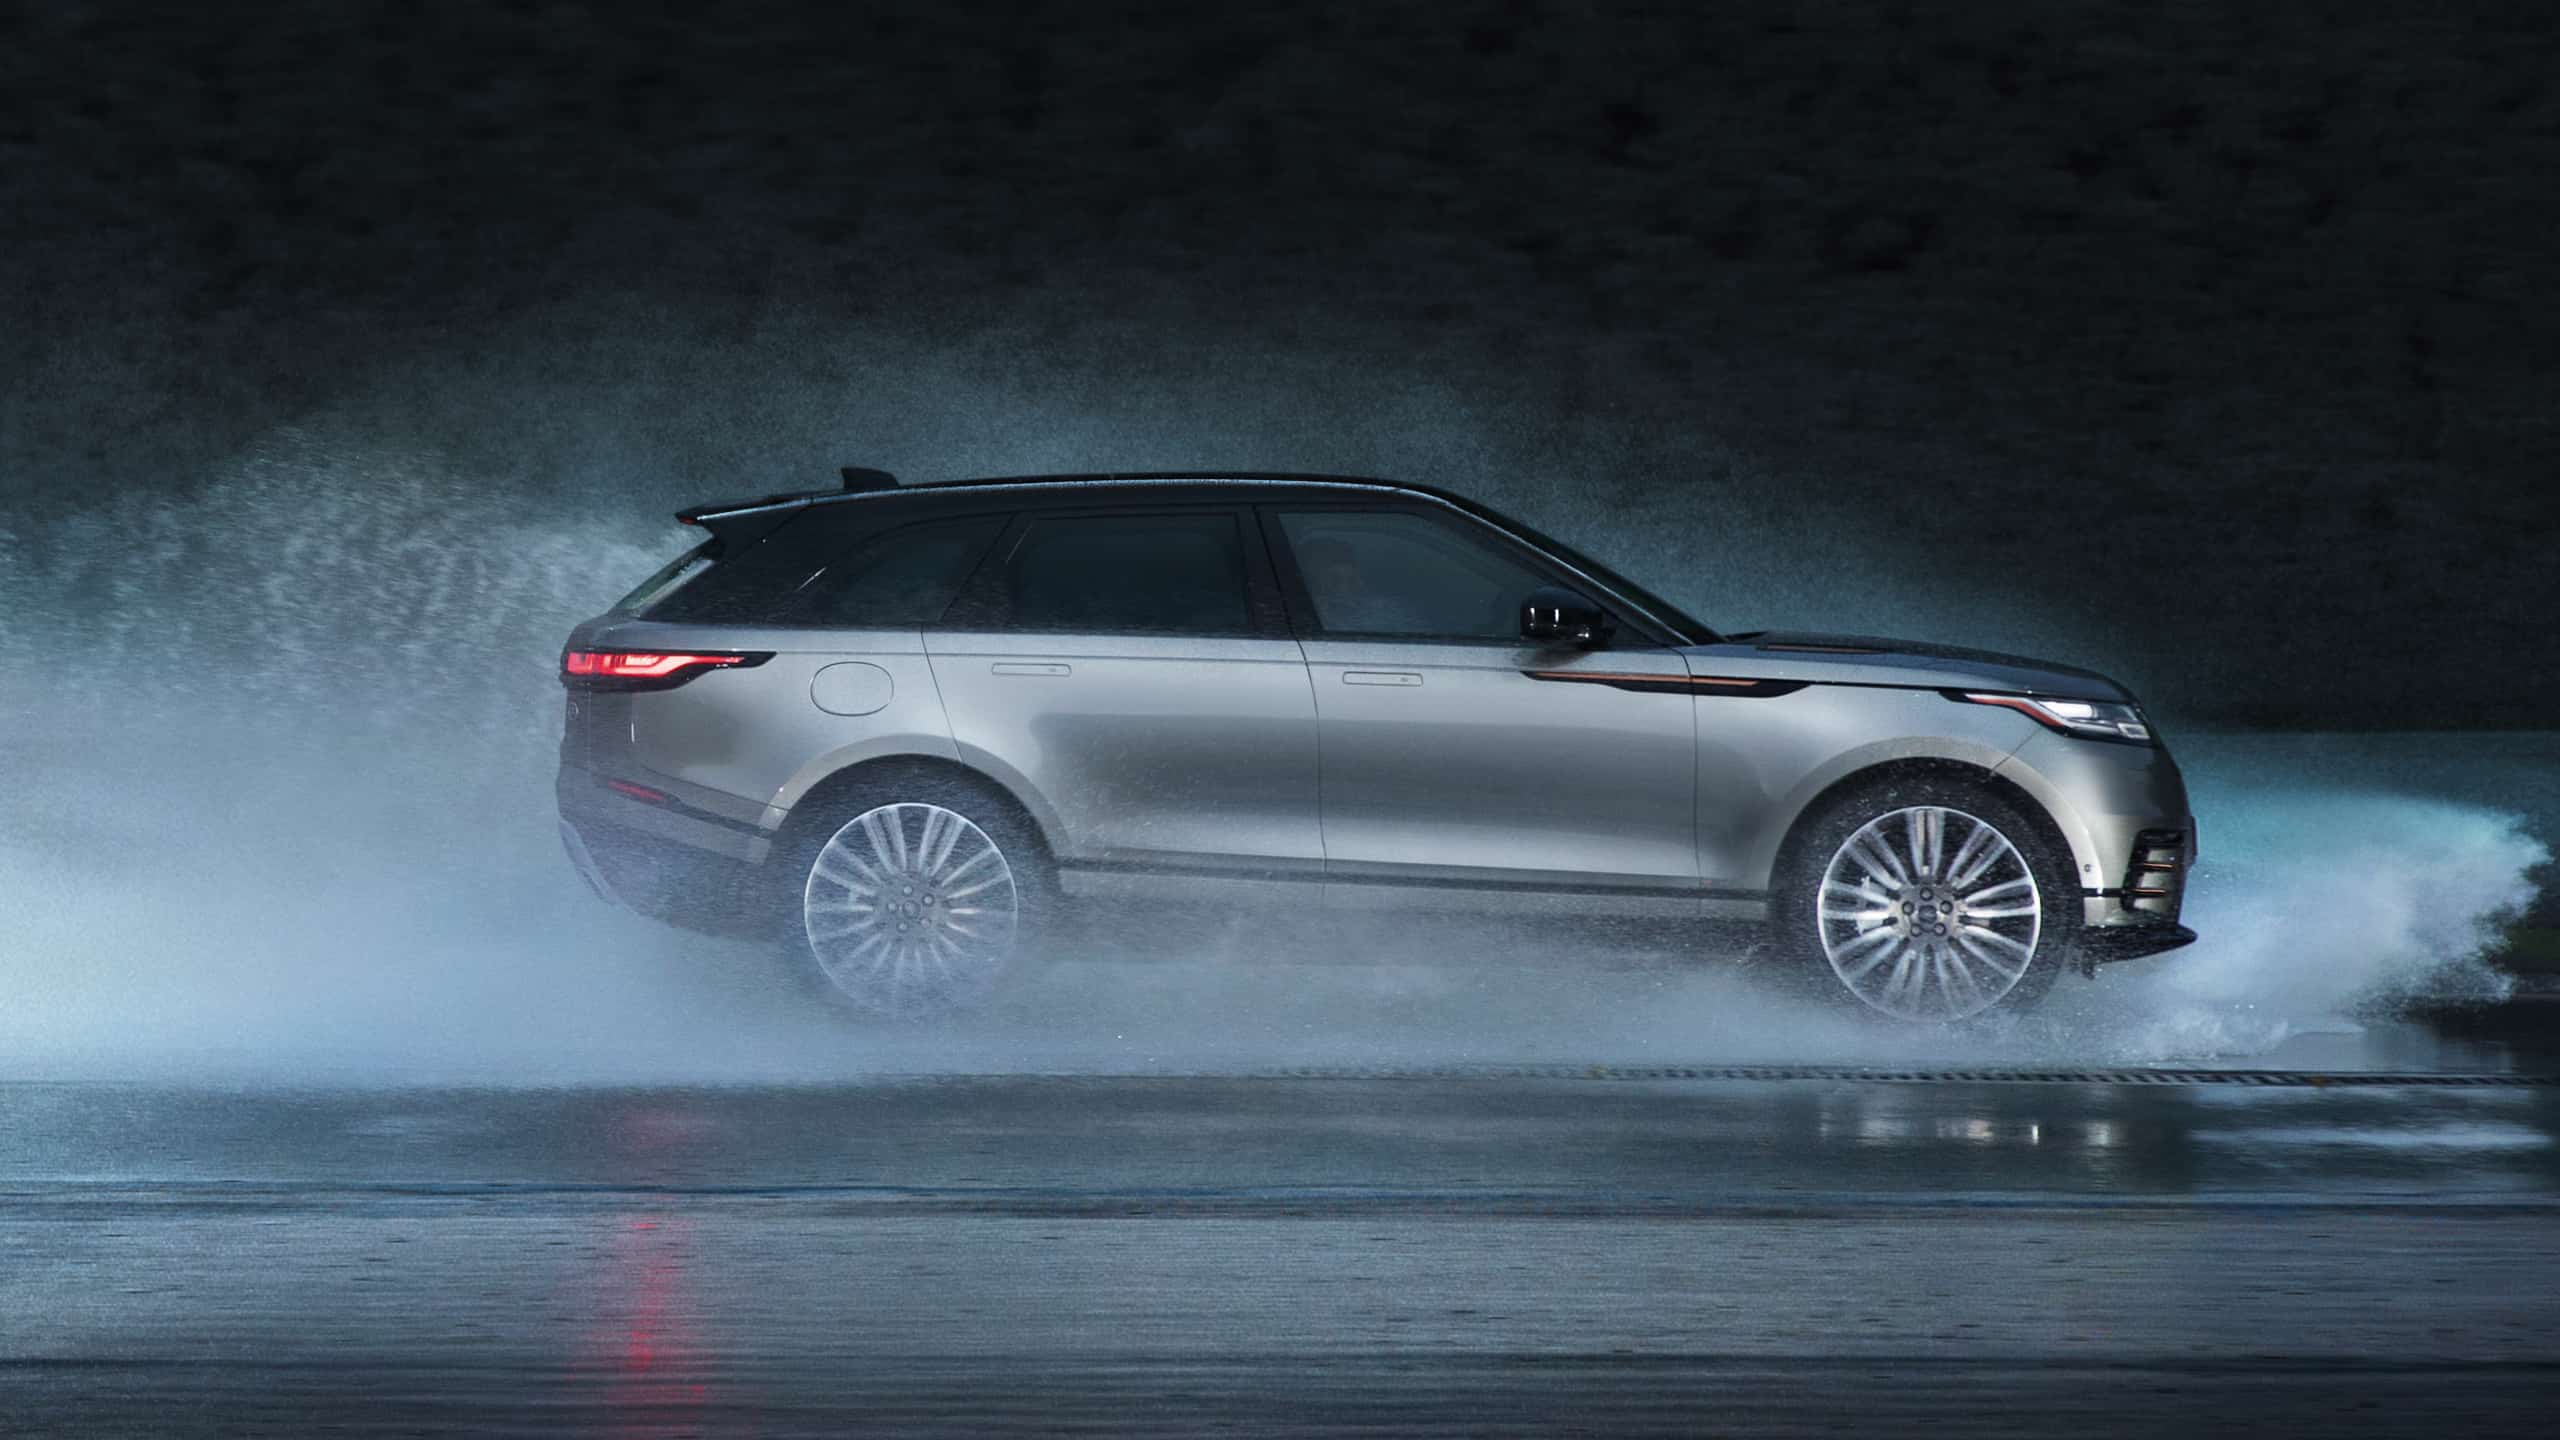 Velar driving quickly through water on road